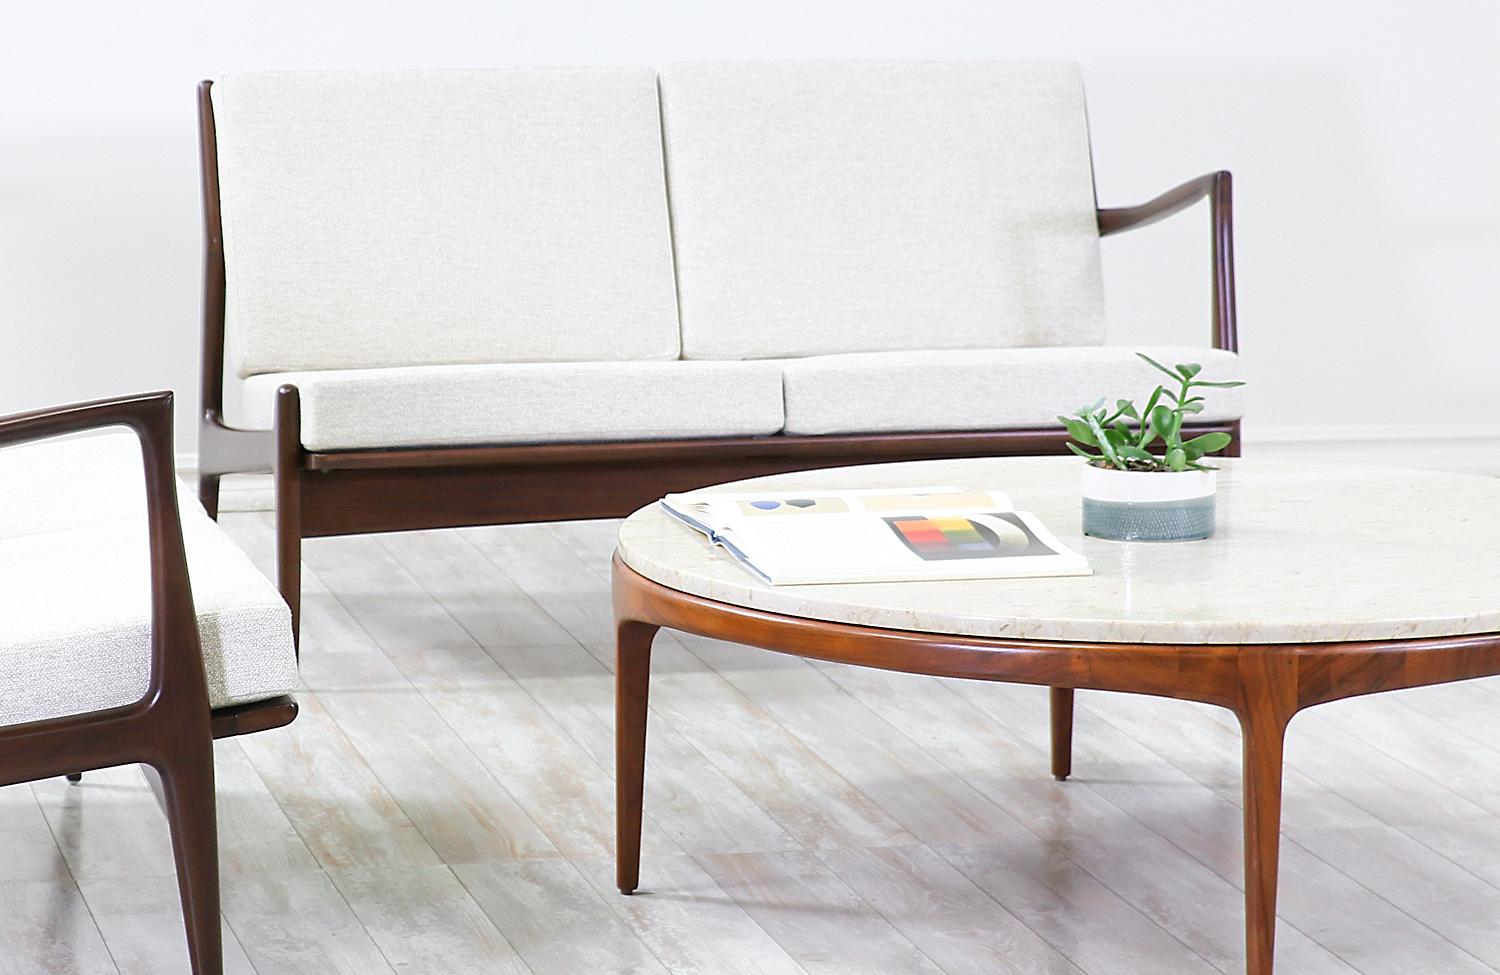 American Mid-Century Modern “Rythm” Coffee Table with Travertine Top by Lane